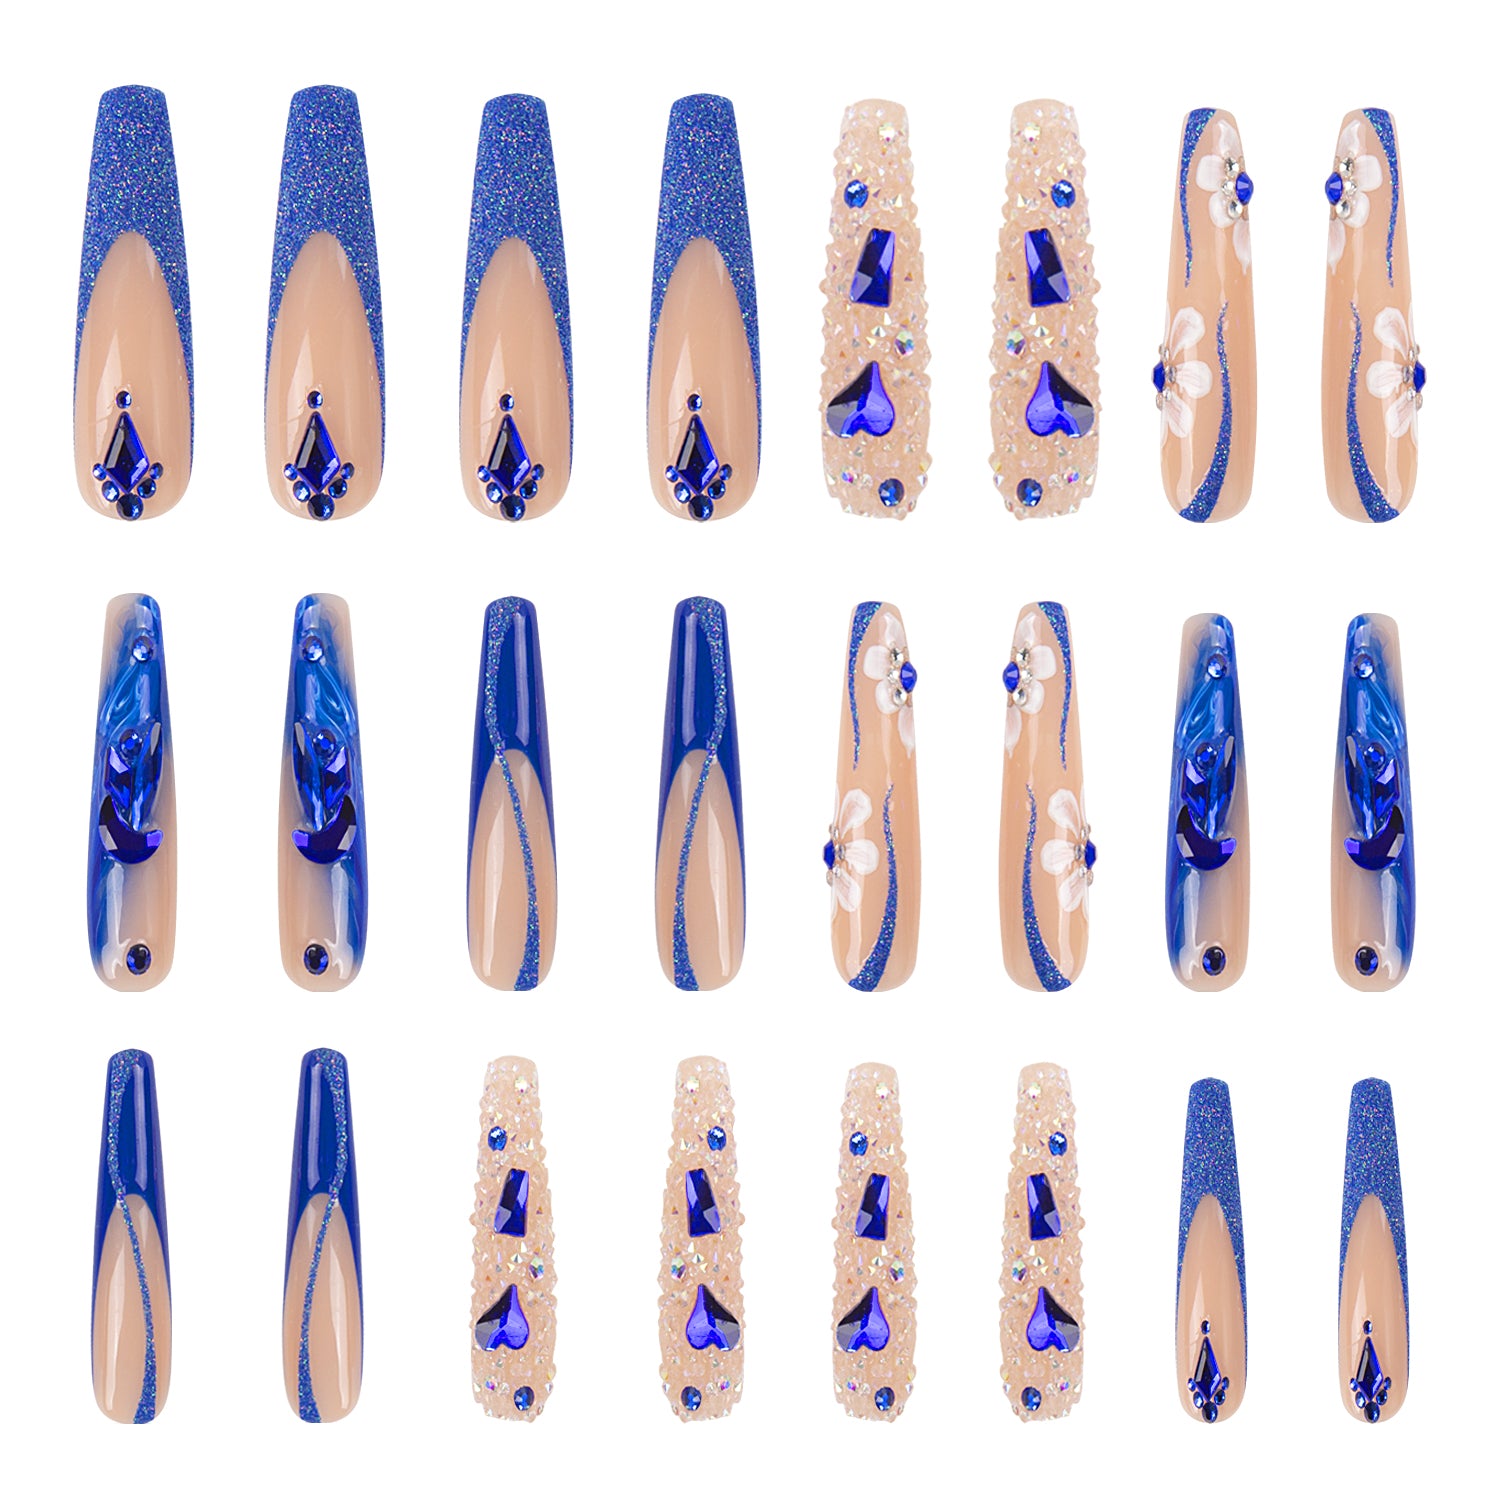 Set of 24 Blue Suede press-on nails with blue French tips, curvy line designs, crystal-like decorations, and blue heart-shaped gems.